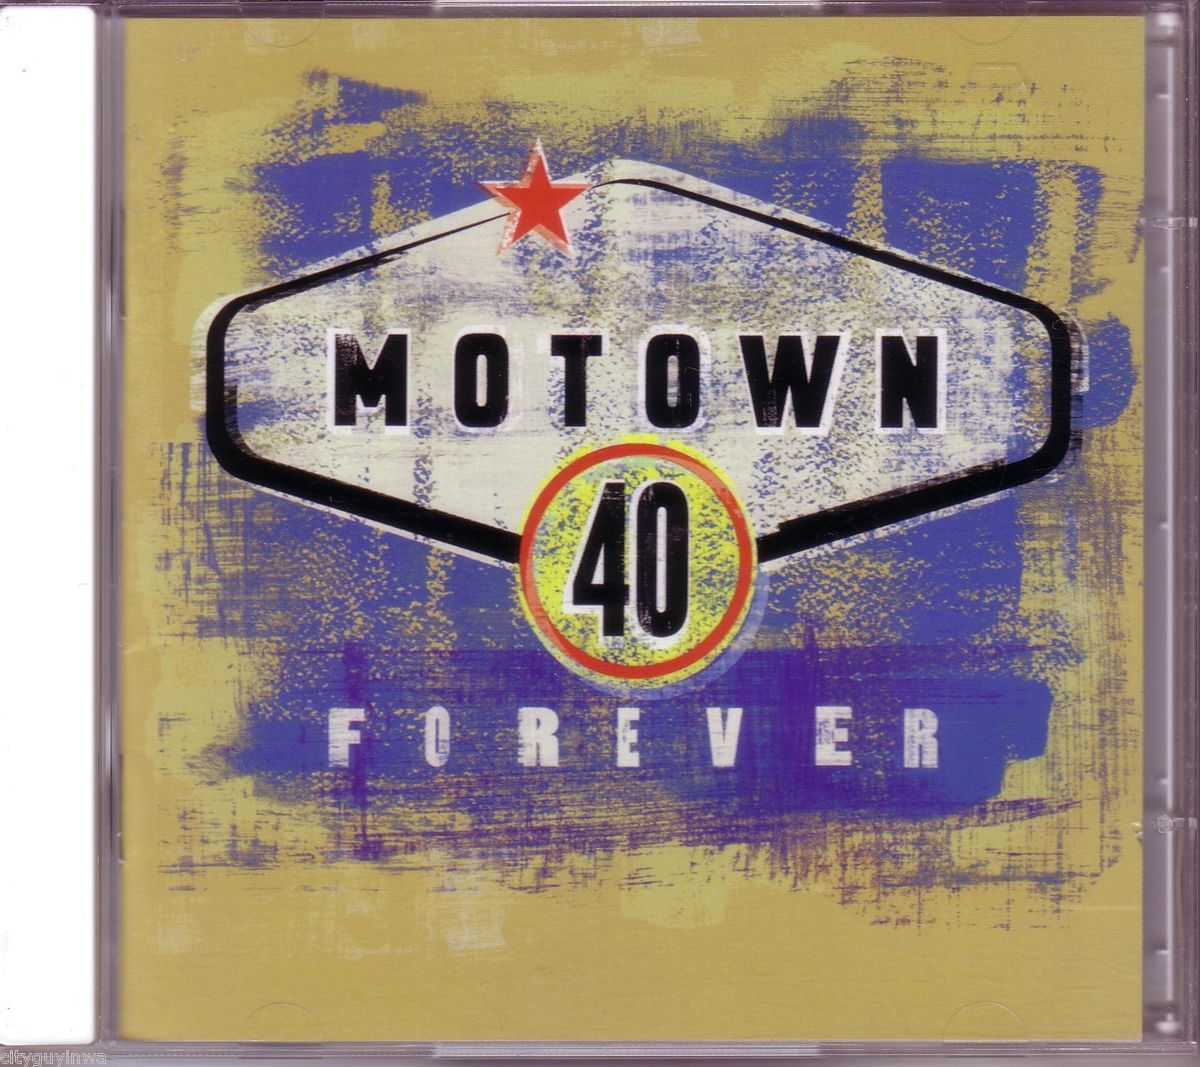 40 FOREVER Collection Various 1998 Oop 2 CD 60s & 70s Hits Marvin Gaye